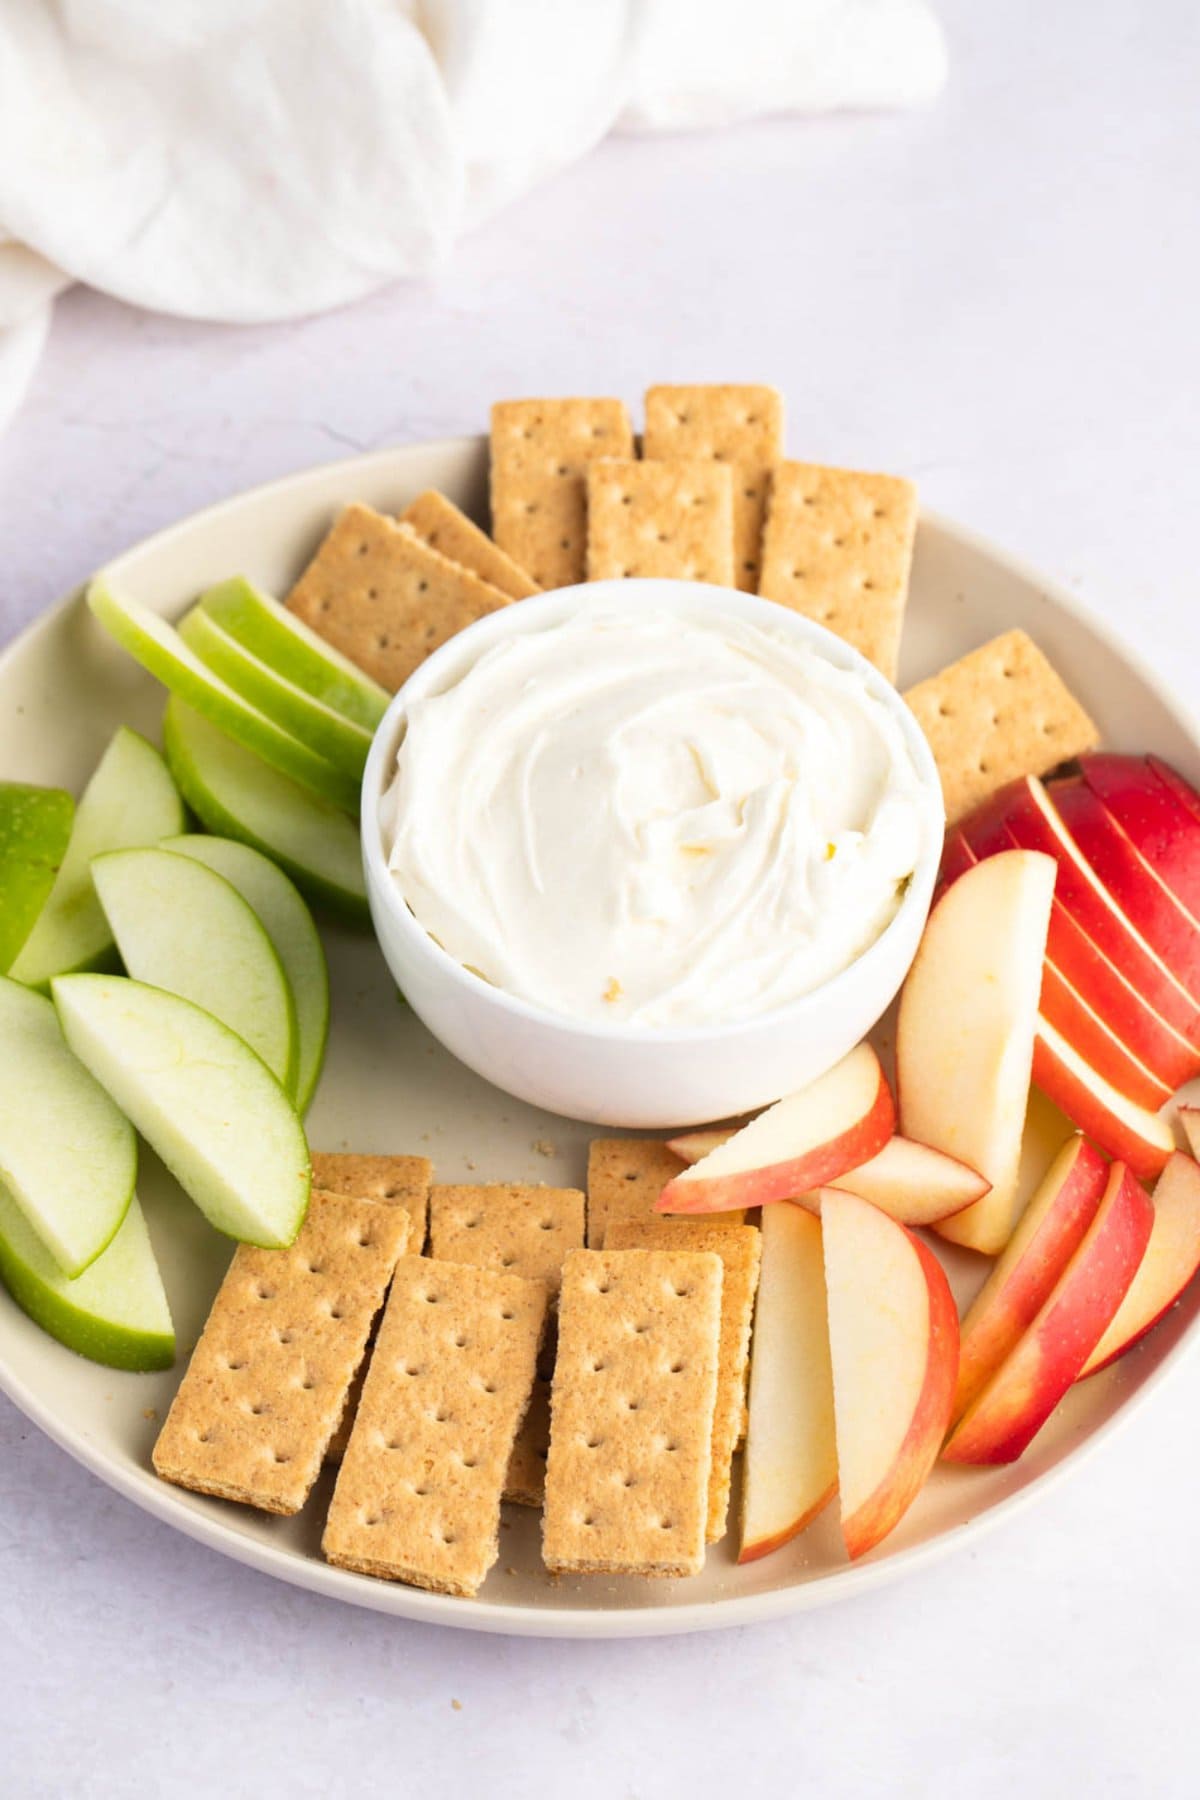 Homemade Marshmallow Cream Cheese Dip with Sliced Fruits and Crackers